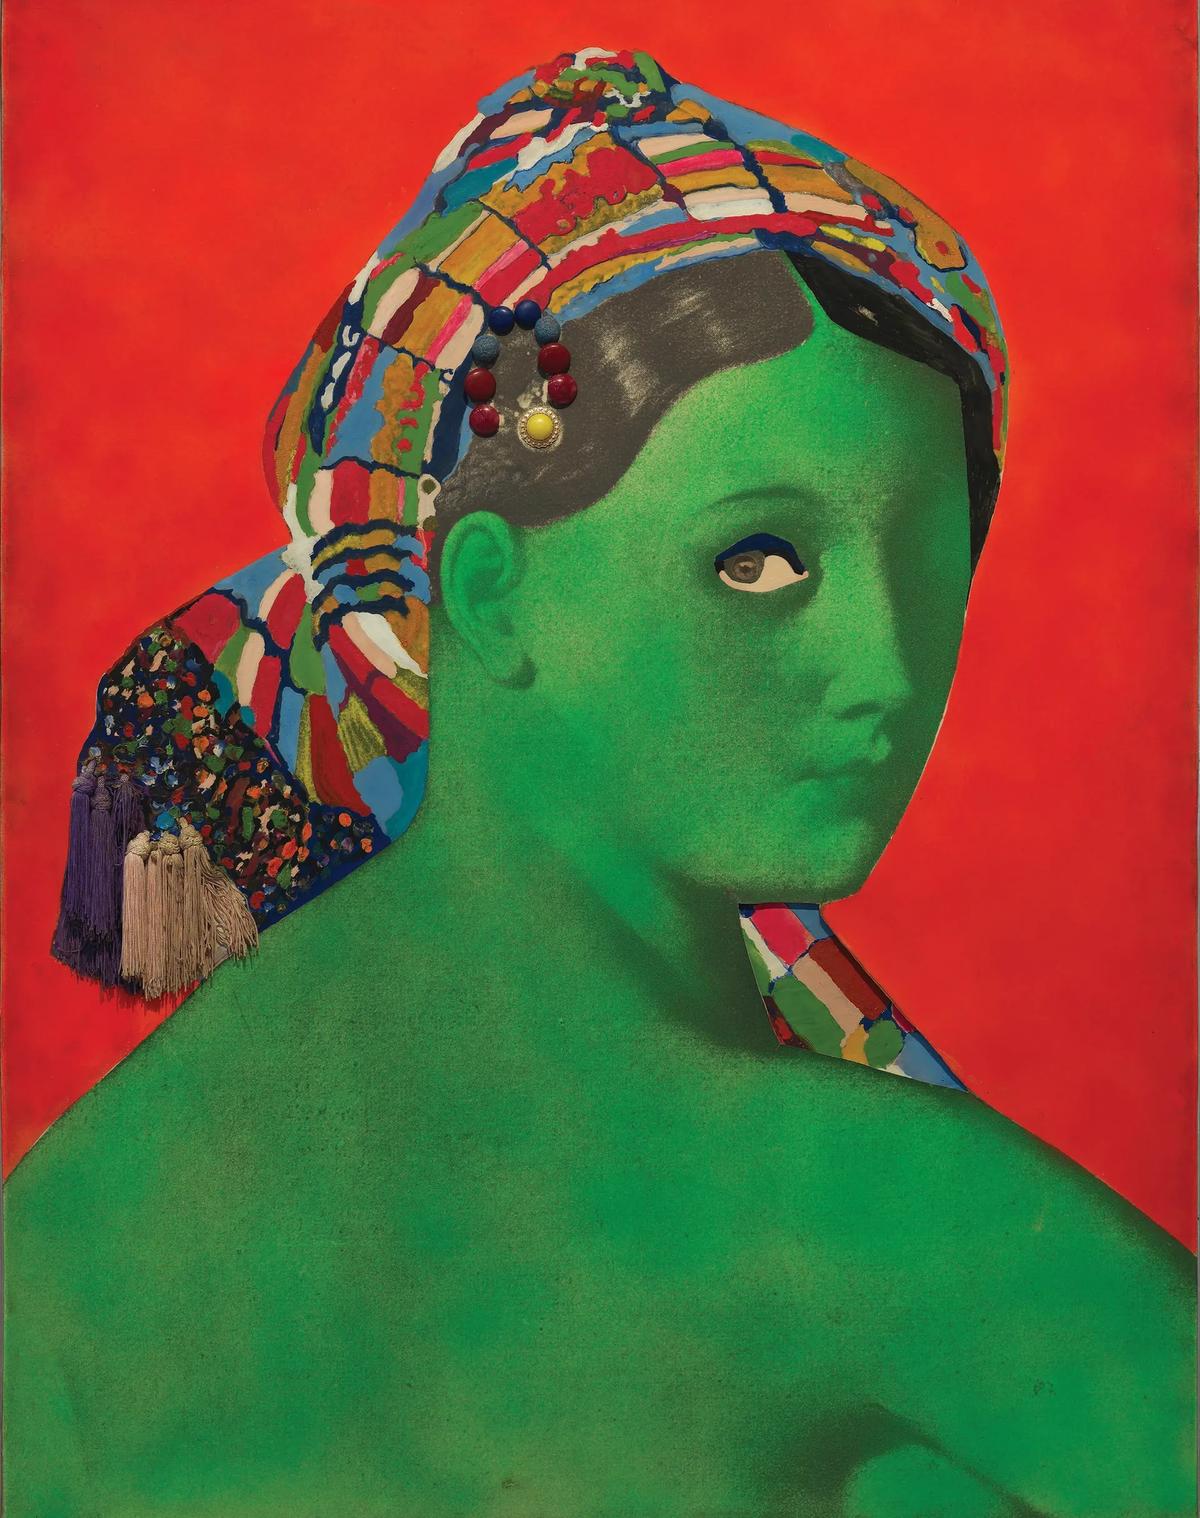 Made in Japan—La Grande Odalisque (1964) by Martial Raysse will be on show at the Musée d’Art Moderne © Centre Pompidou; MNAM-CCI; Dist. RMN-Grand Palais/Philippe Migeat